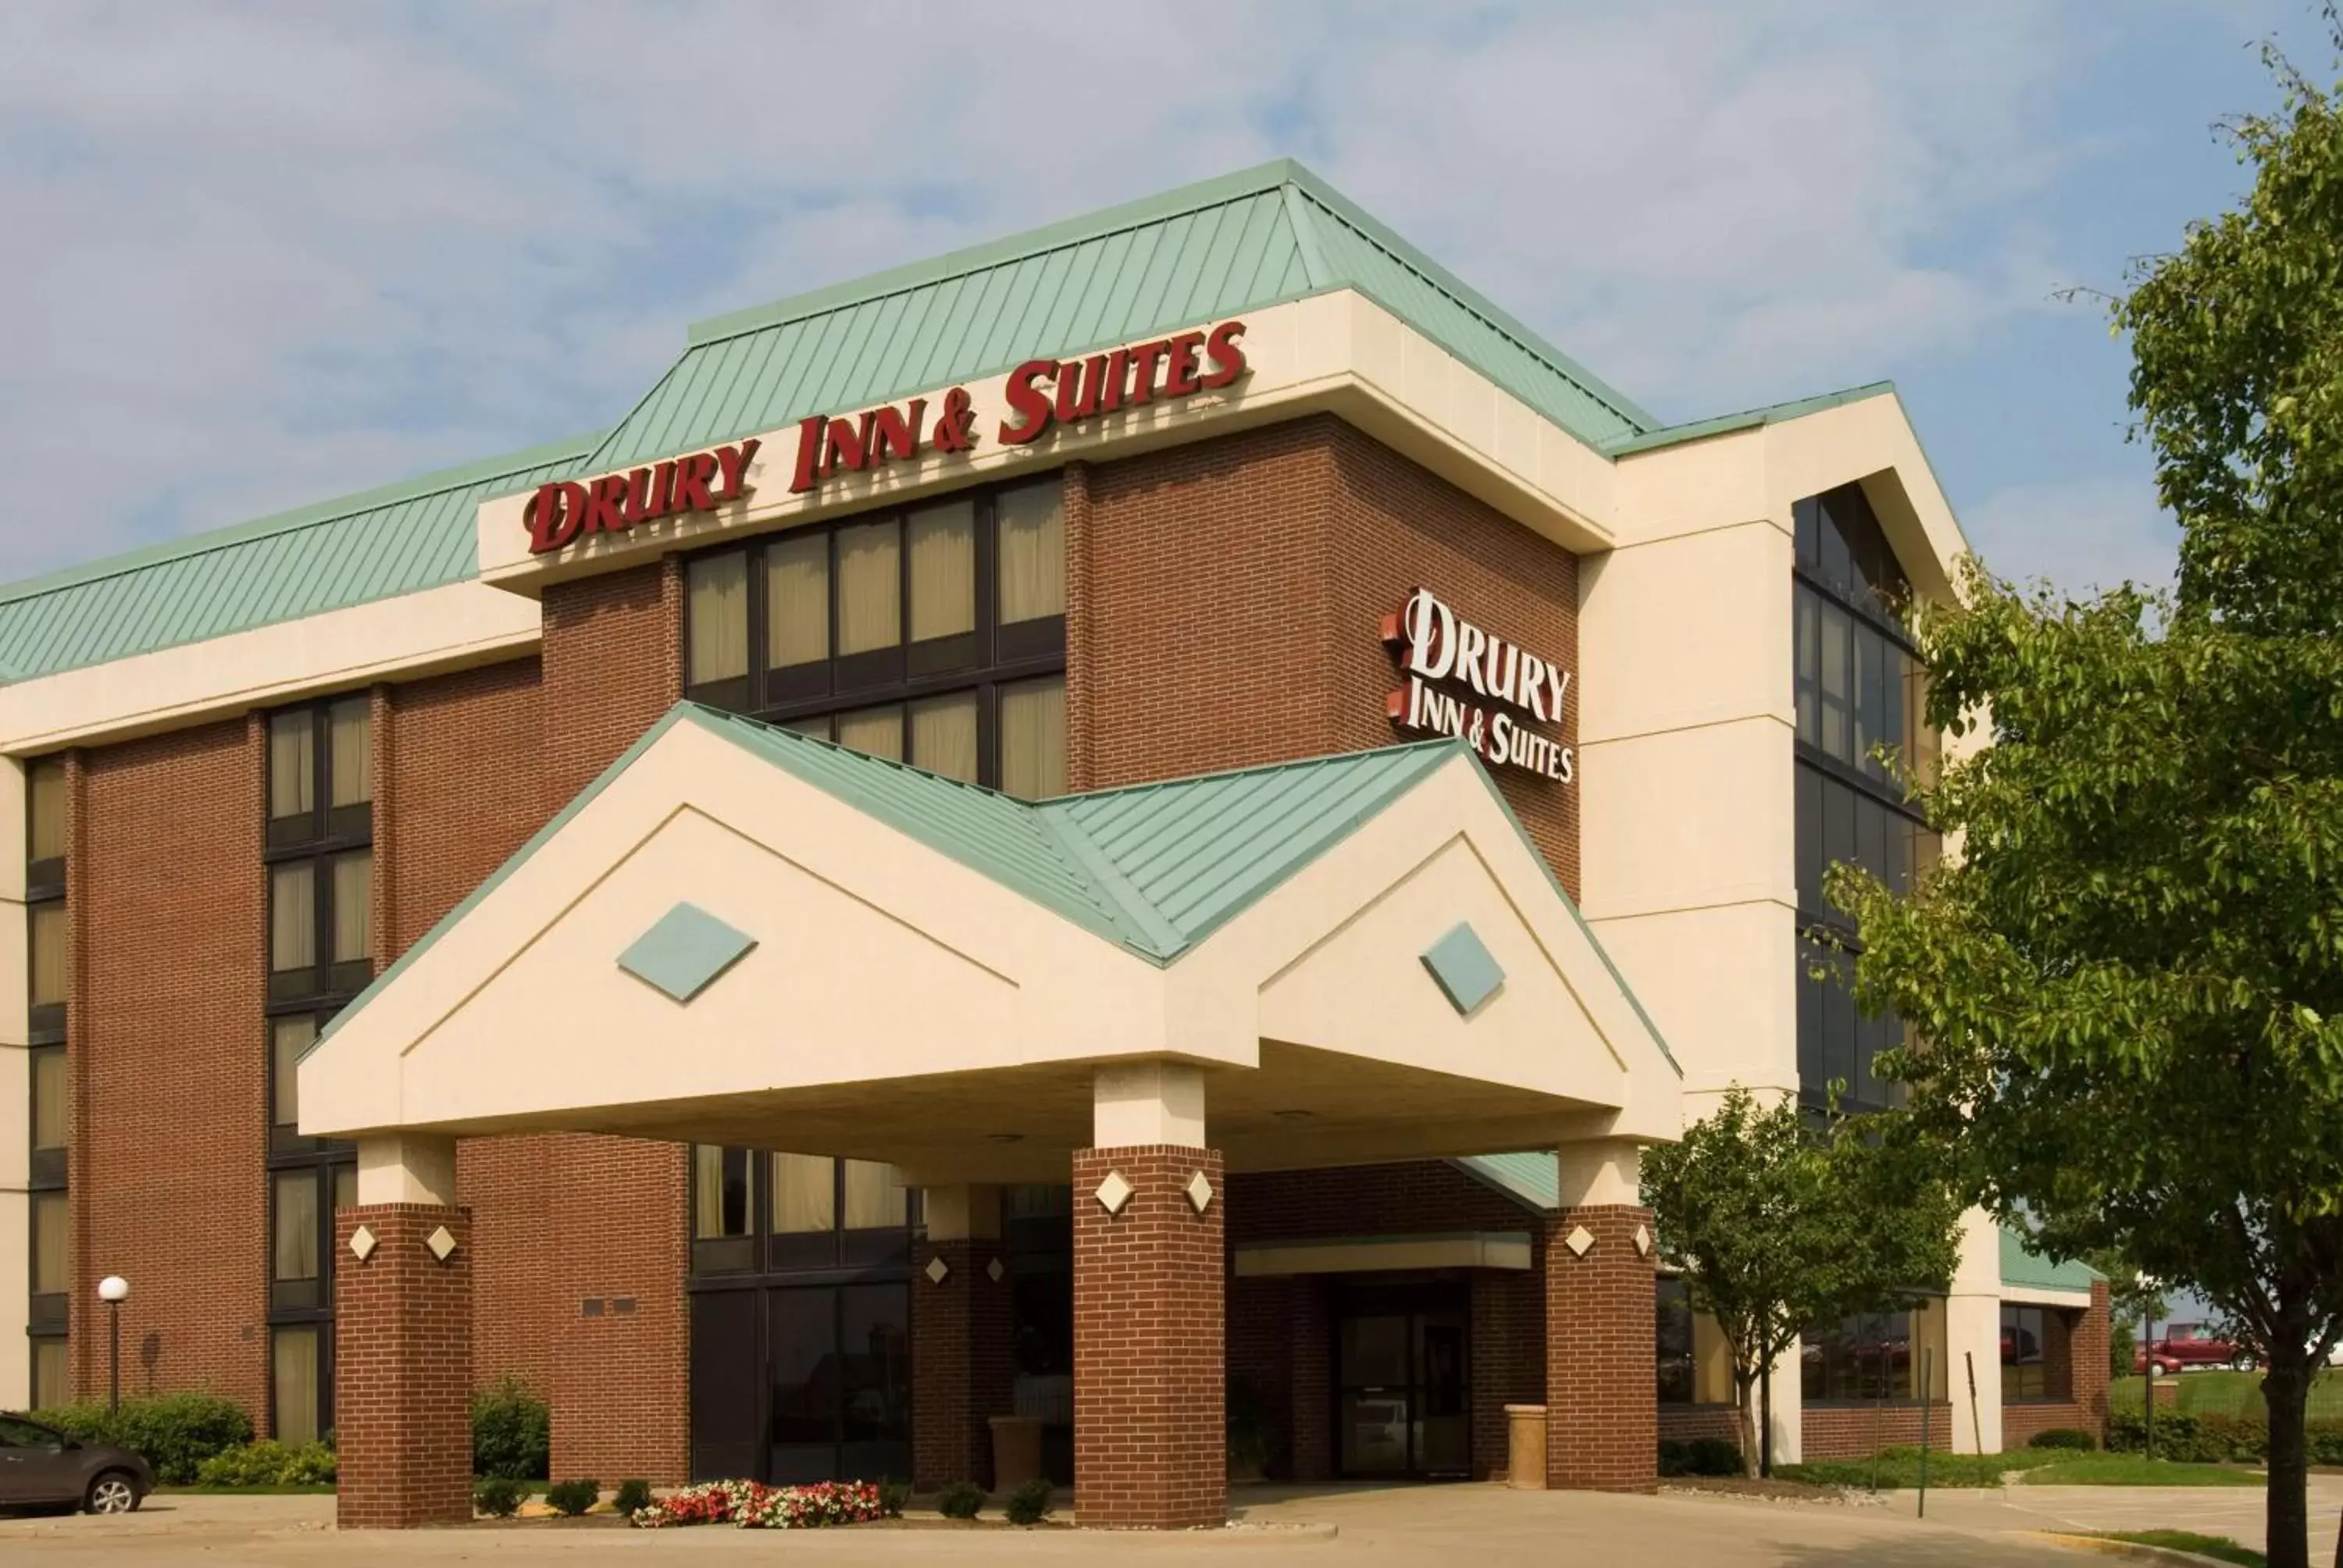 Property Building in Drury Inn & Suites Champaign